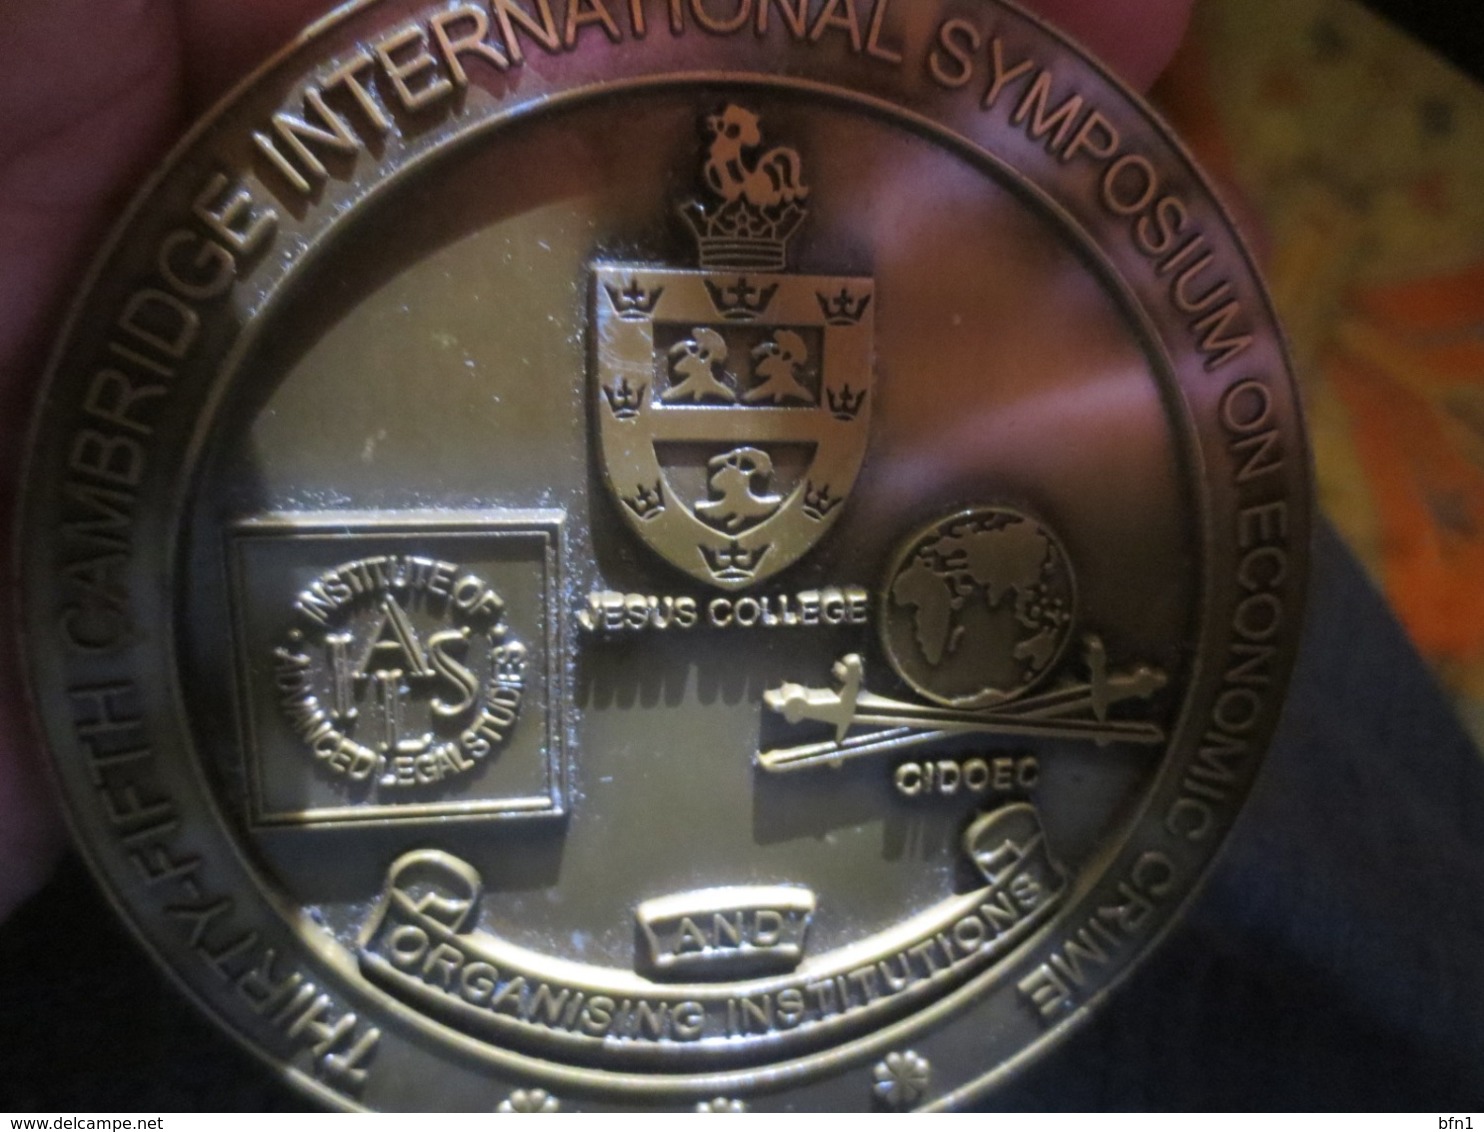 MEDAL Thirty-fifth Cambridge International Symposium On Economic Crime - Professionals/Firms